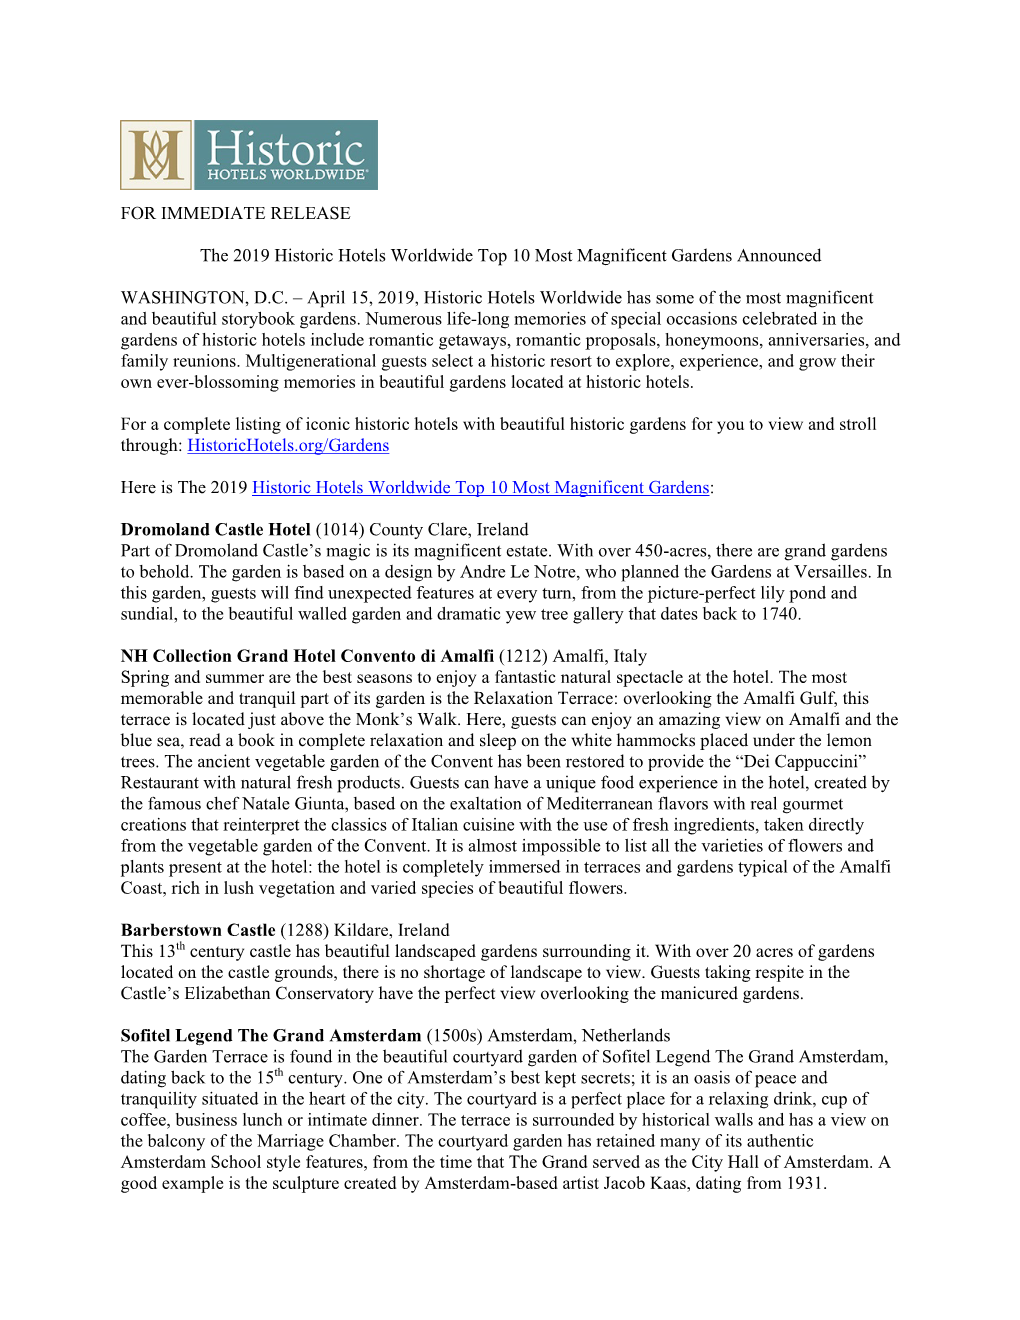 FOR IMMEDIATE RELEASE the 2019 Historic Hotels Worldwide Top 10